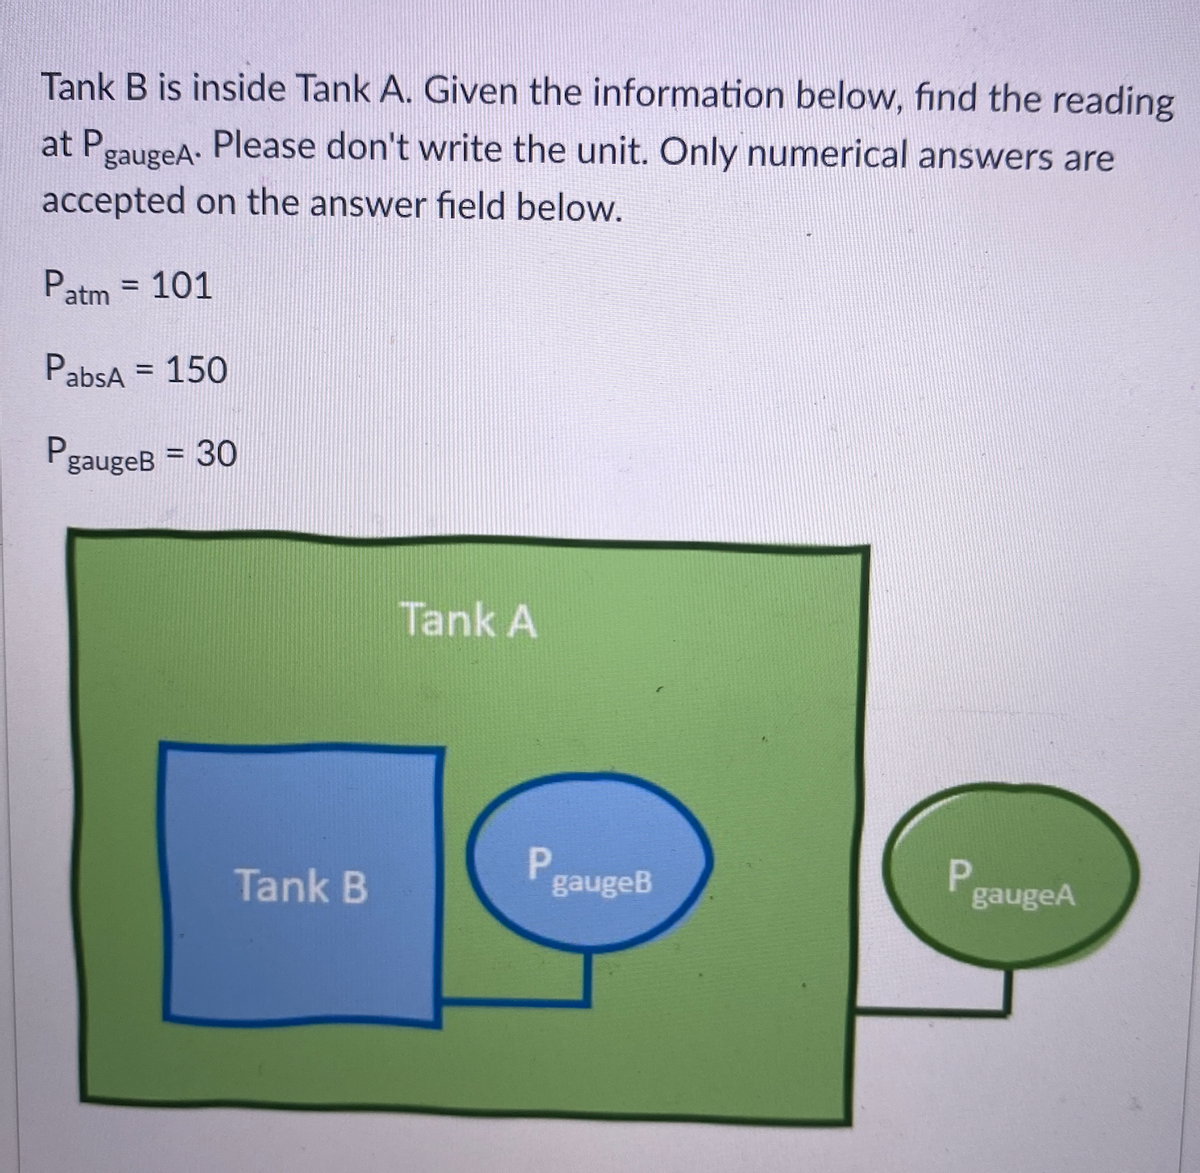 Tank B is inside Tank A. Given the information below, find the reading
at PgaugeA. Please don't write the unit. Only numerical answers are
accepted on the answer field below.
Patm = 101
%3D
PabsA = 150
gaugeB = 30
%3D
Tank A
Tank B
PgaugeA
gaugeB
